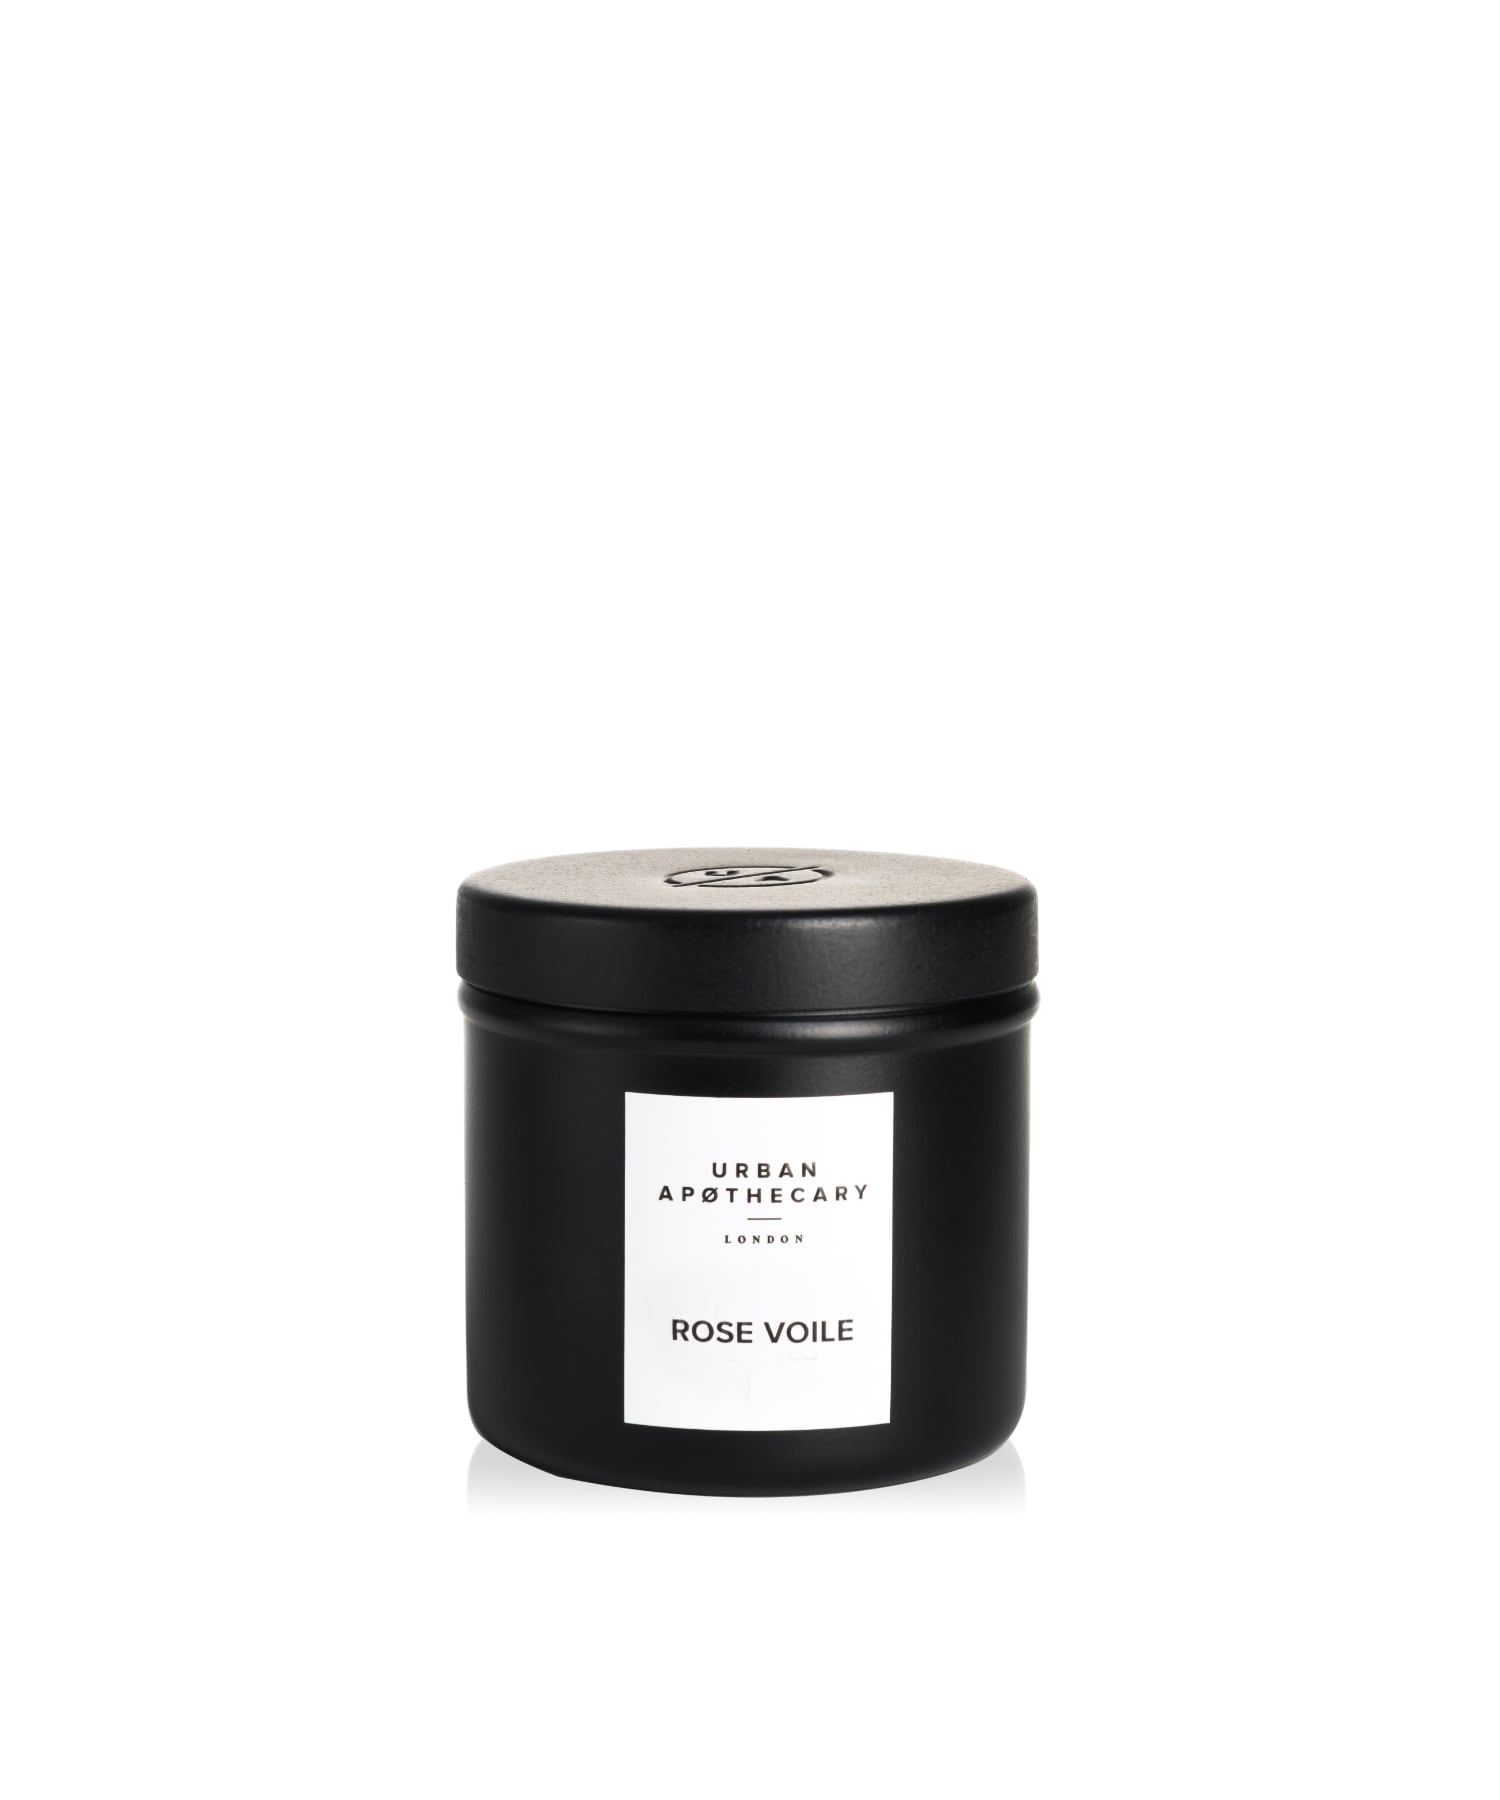 URBAN APOTHECARY Rose Voile Luxury Iron Travel Candle 175 g